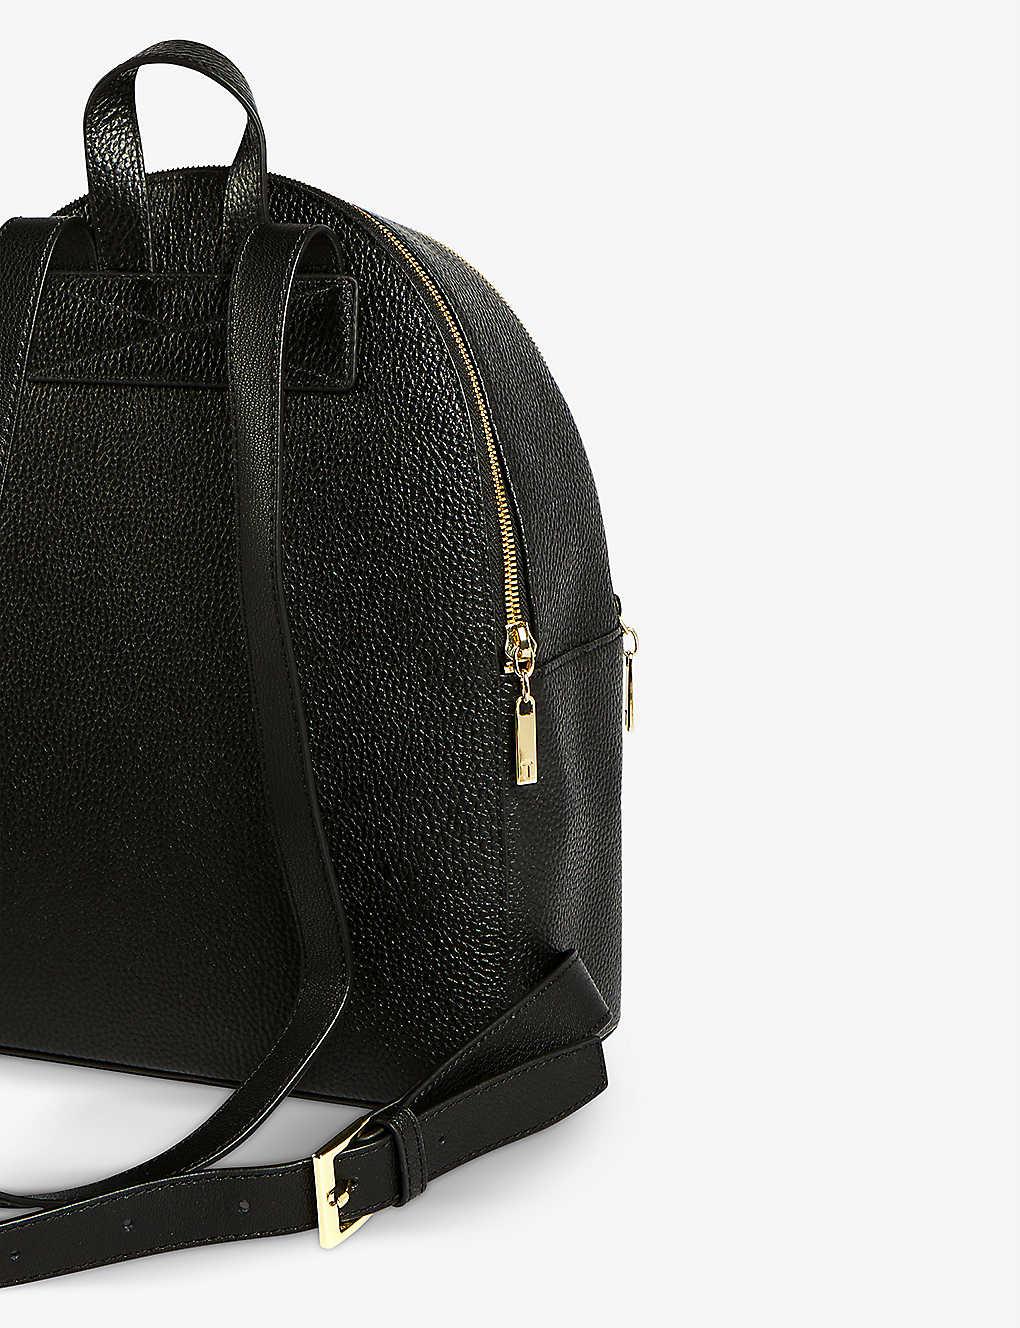 Ted Baker Coorra Pebbled Leather Backpack in Black | Lyst